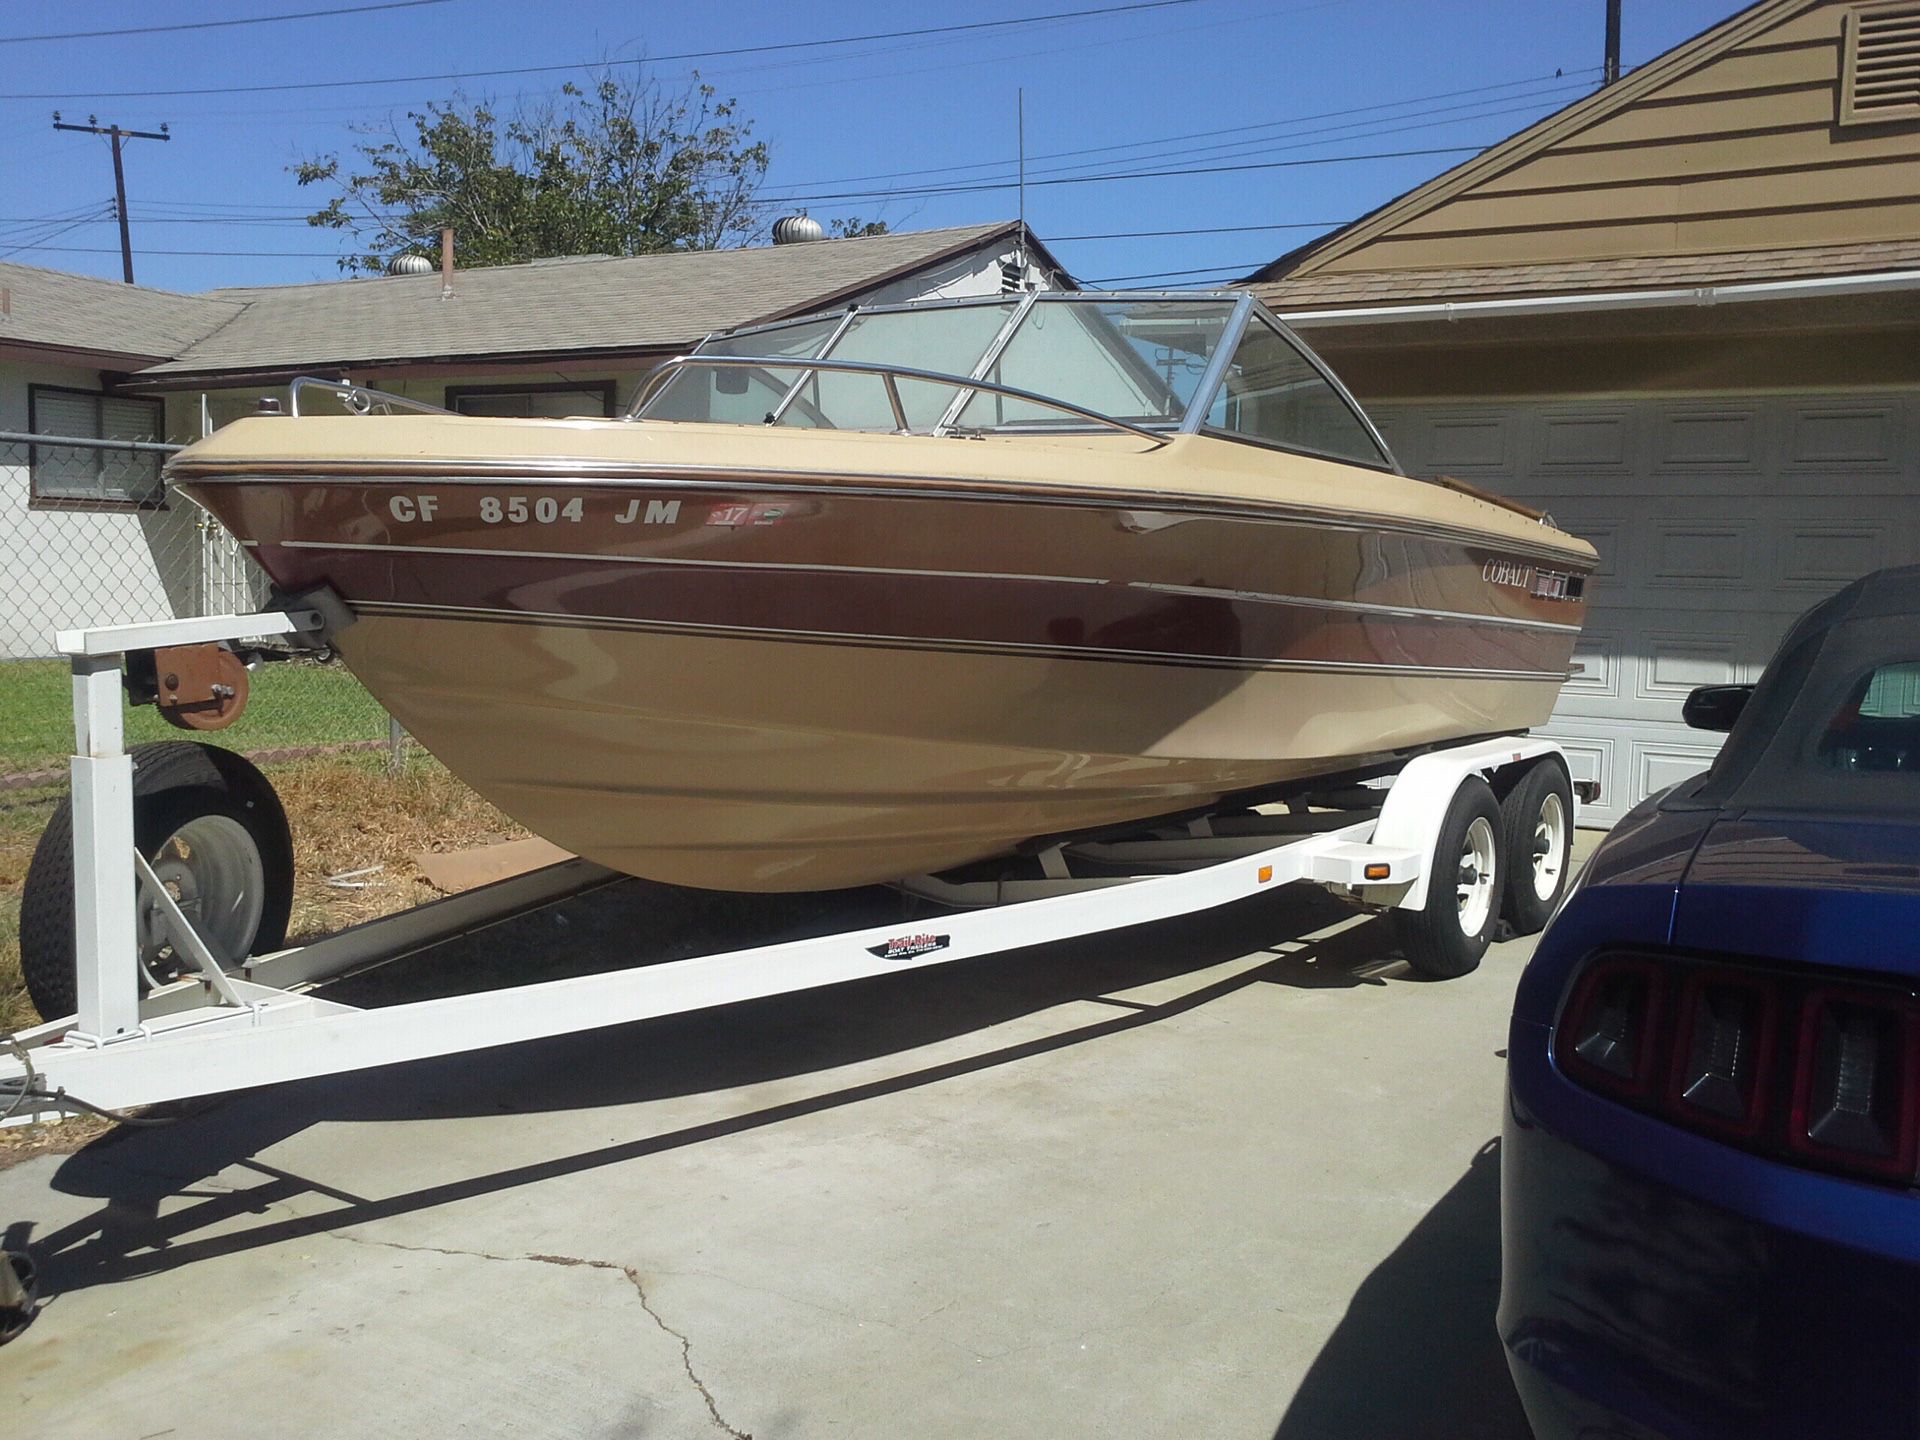 19 foot 87 cobalt boat must see!!! 3,000 OBO will trade for travel trailer